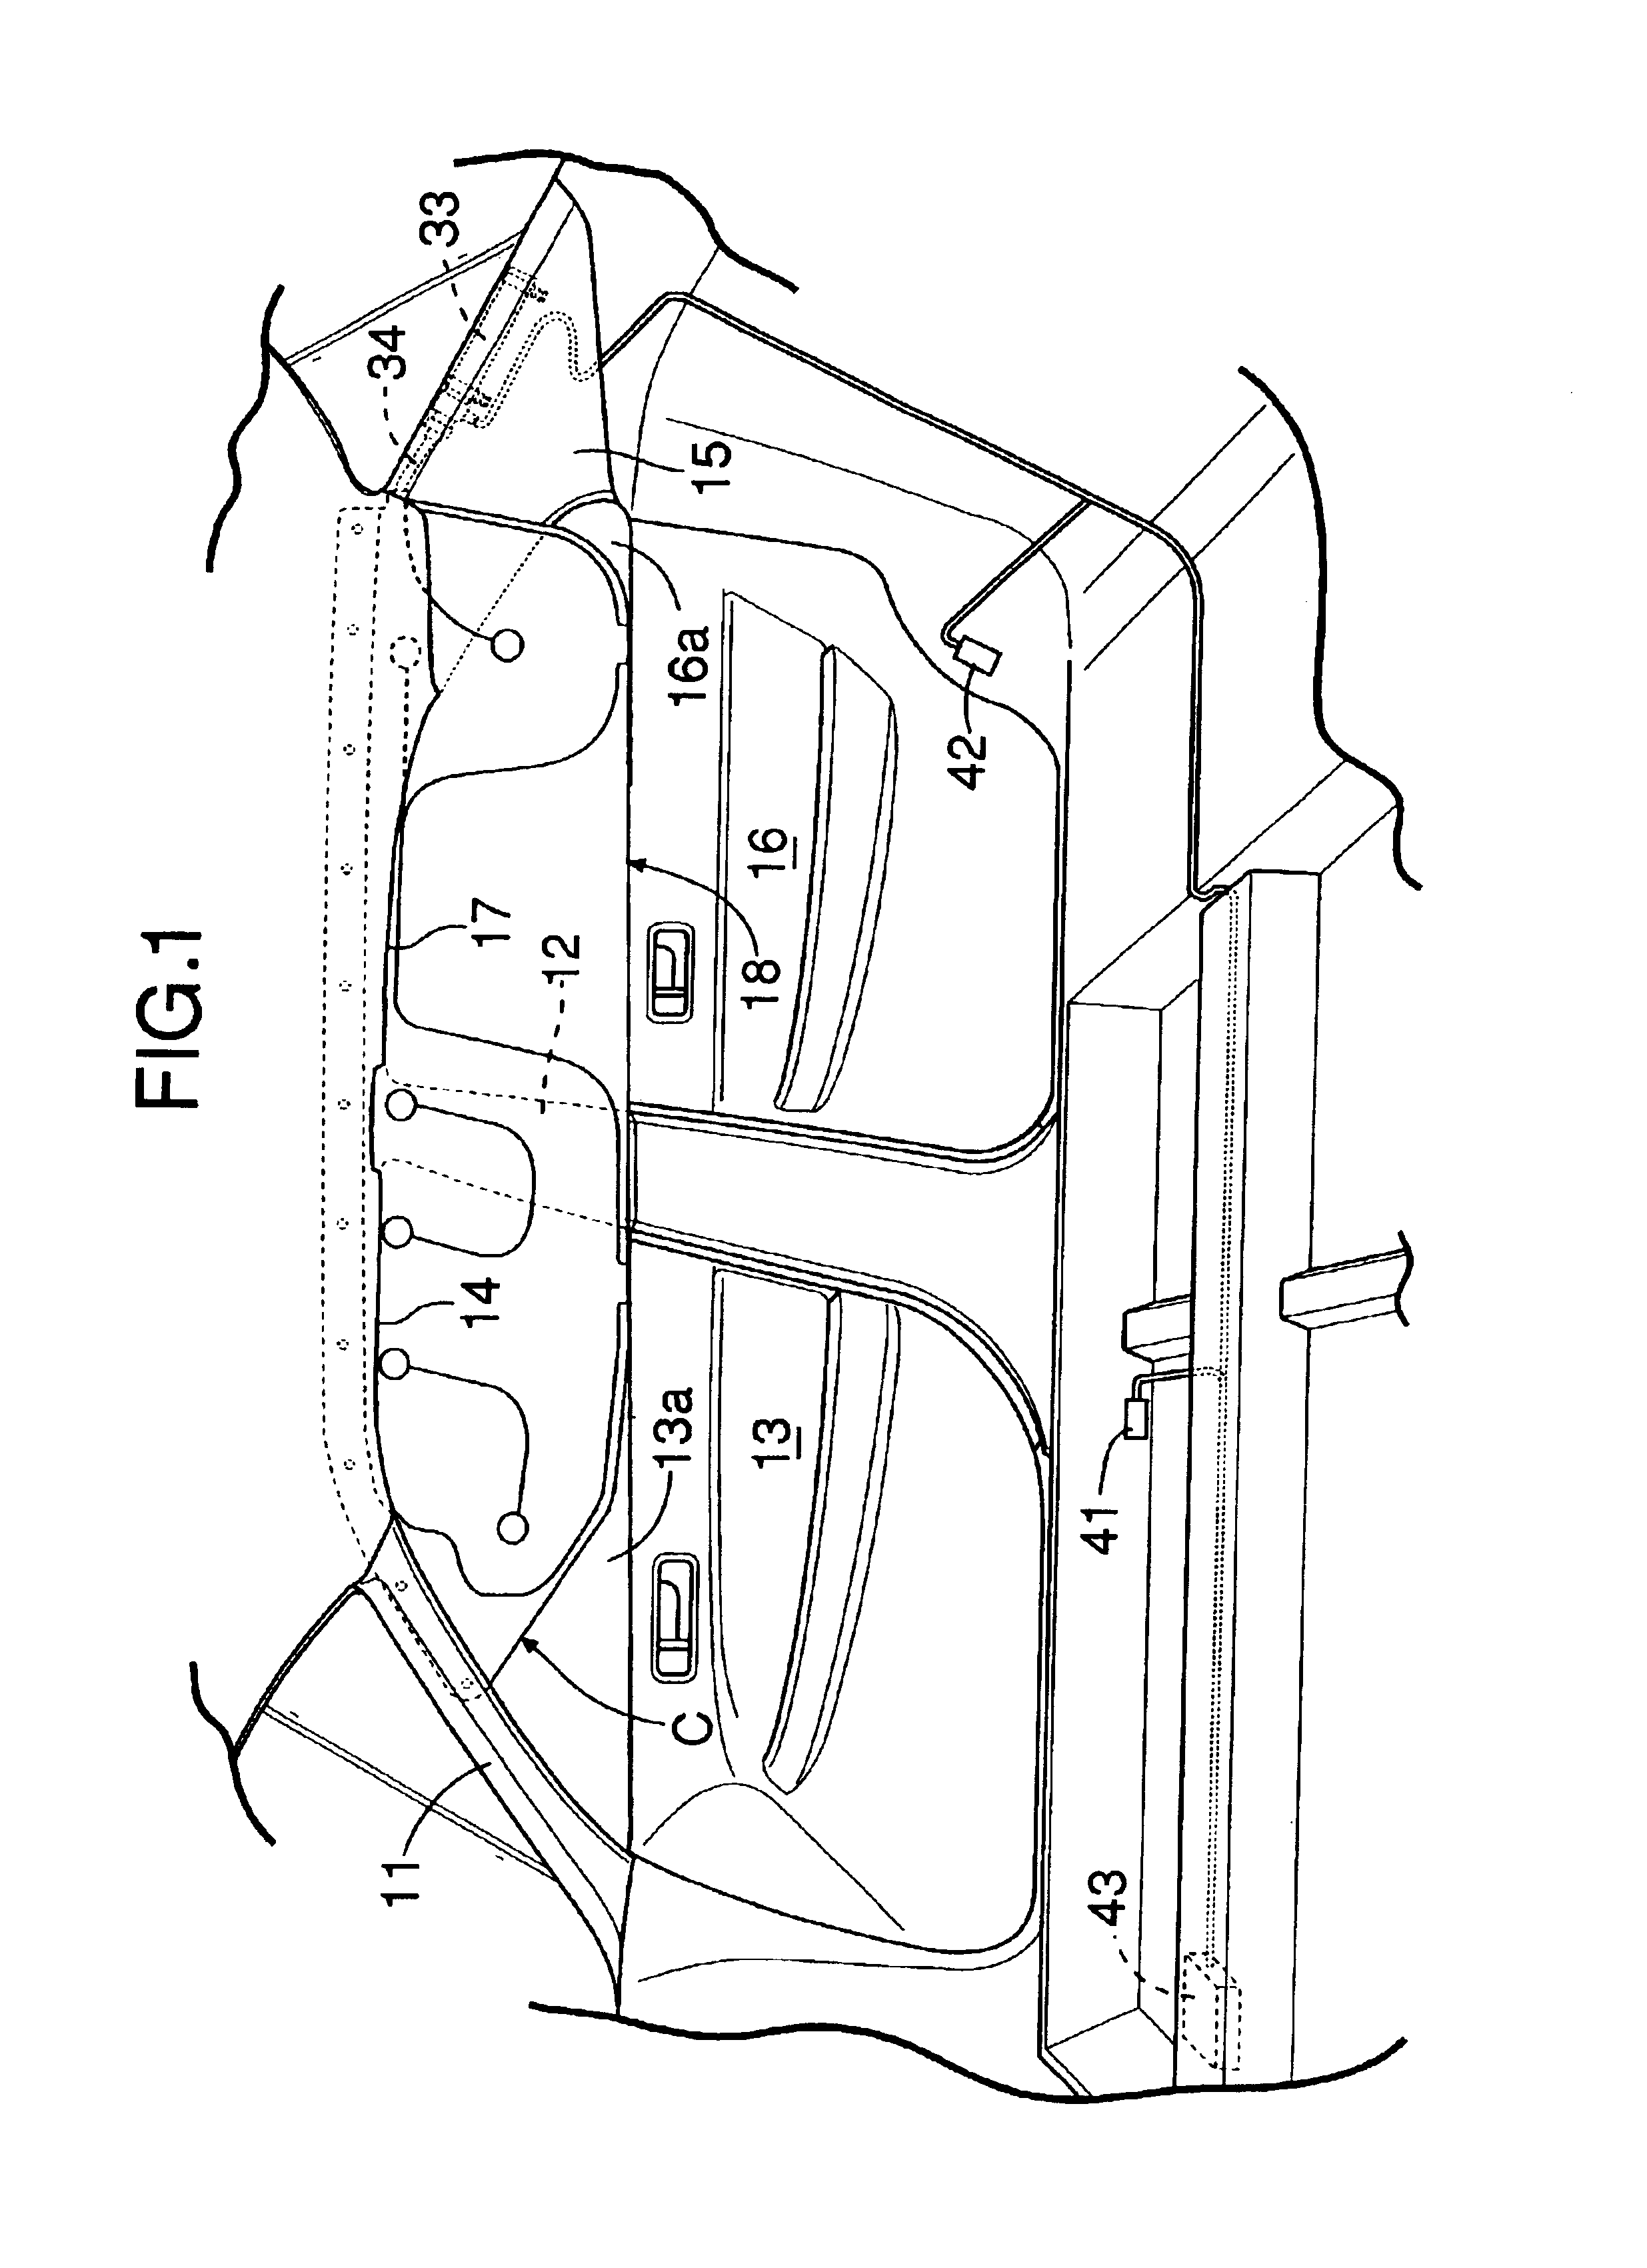 Occupant restraint system including side airbag with vent hole